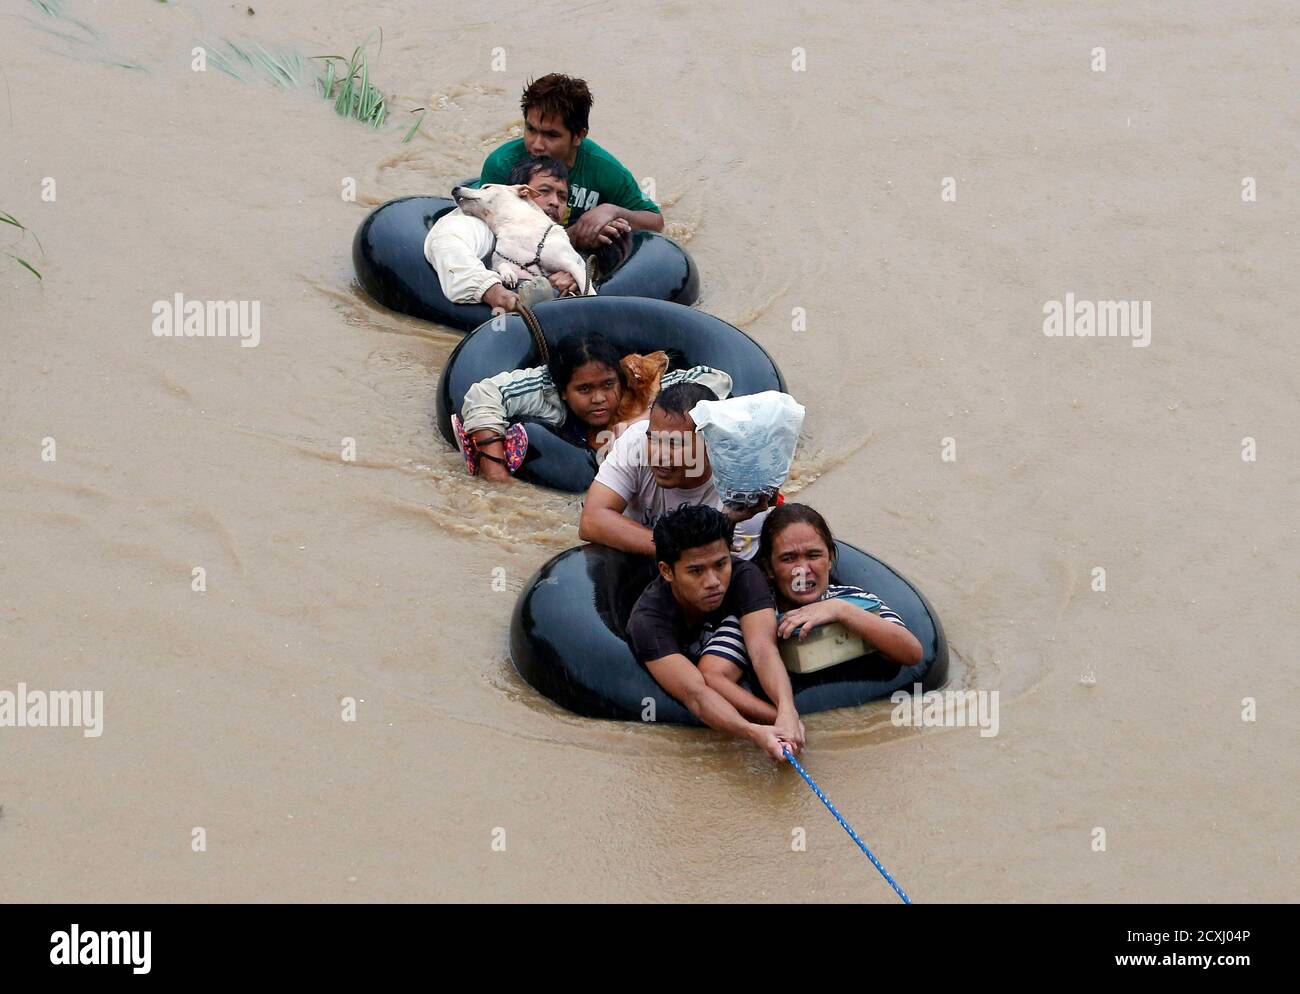 Flood victims are pulled on inflatable tire tubes as they are evacuated from heavy flooding brought by tropical depression 'Agaton', in Butuan, in the southern Philippine island of Mindanao January 20, 2014. Floods and landslides caused by tropical depression 'Agaton'  have killed 40 people and more than 500,000 people are displaced in Mindanao, the National Disaster Risk Reduction and Management Council reported on Sunday.   REUTERS/Erik De Castro (PHILIPPINES - Tags: DISASTER ENVIRONMENT TPX IMAGES OF THE DAY) Stock Photo